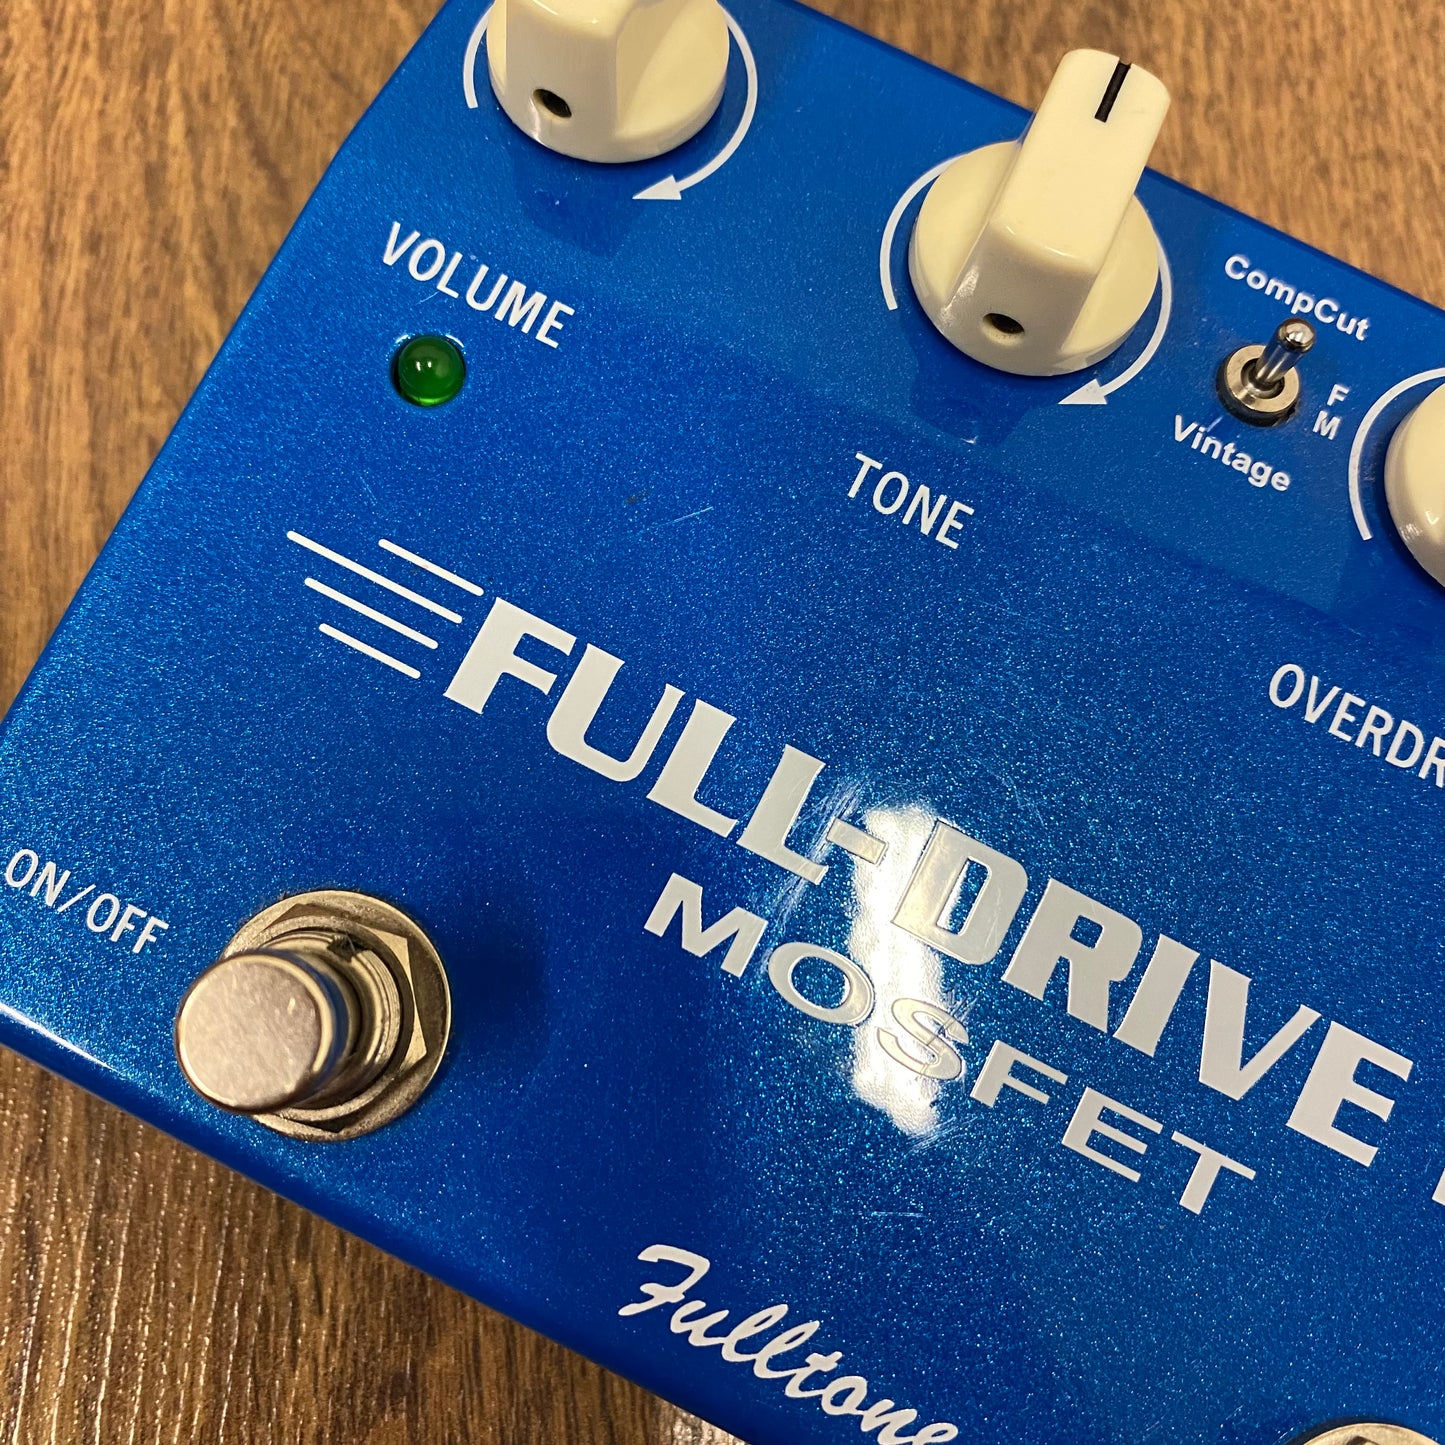 Pre-Owned Fulltone Full-Drive 2 Mosfet Overdrive Pedal